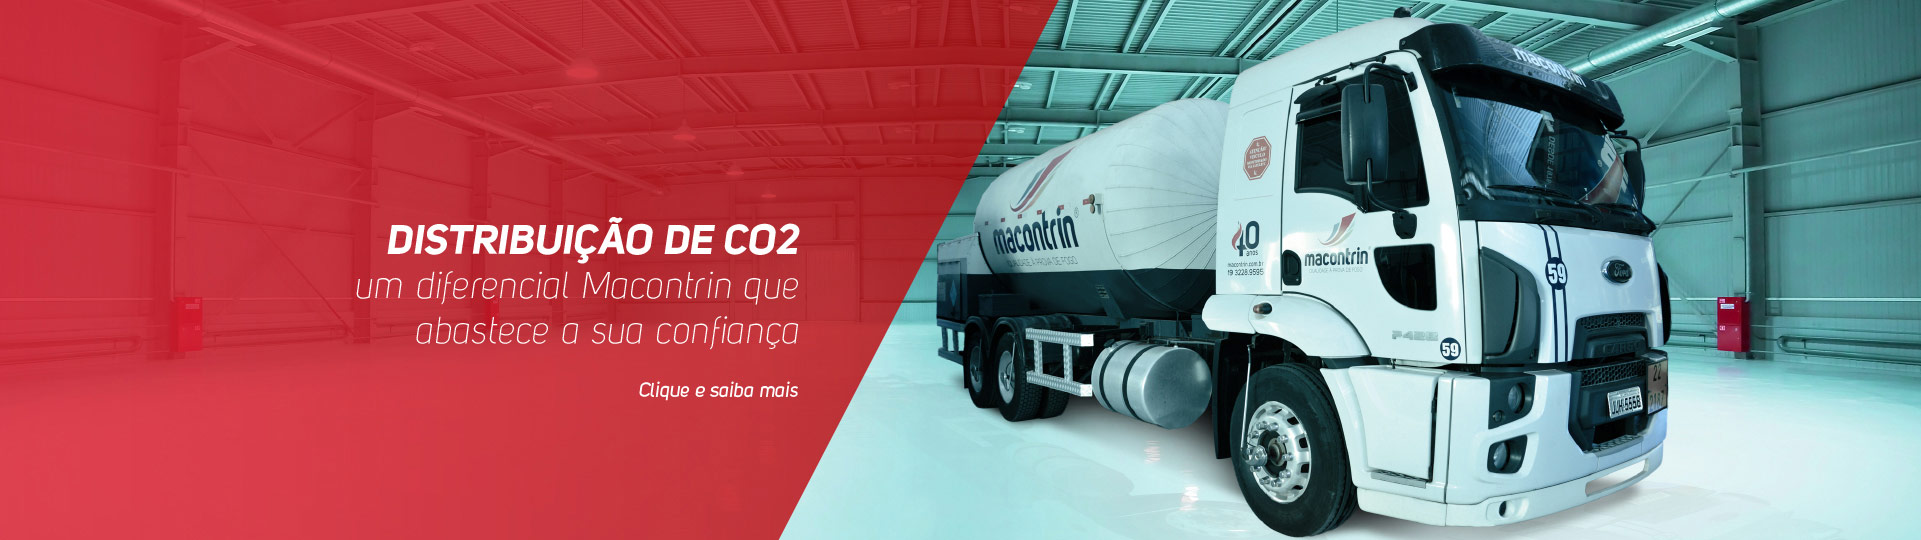 distribuicao-co2-full-banner